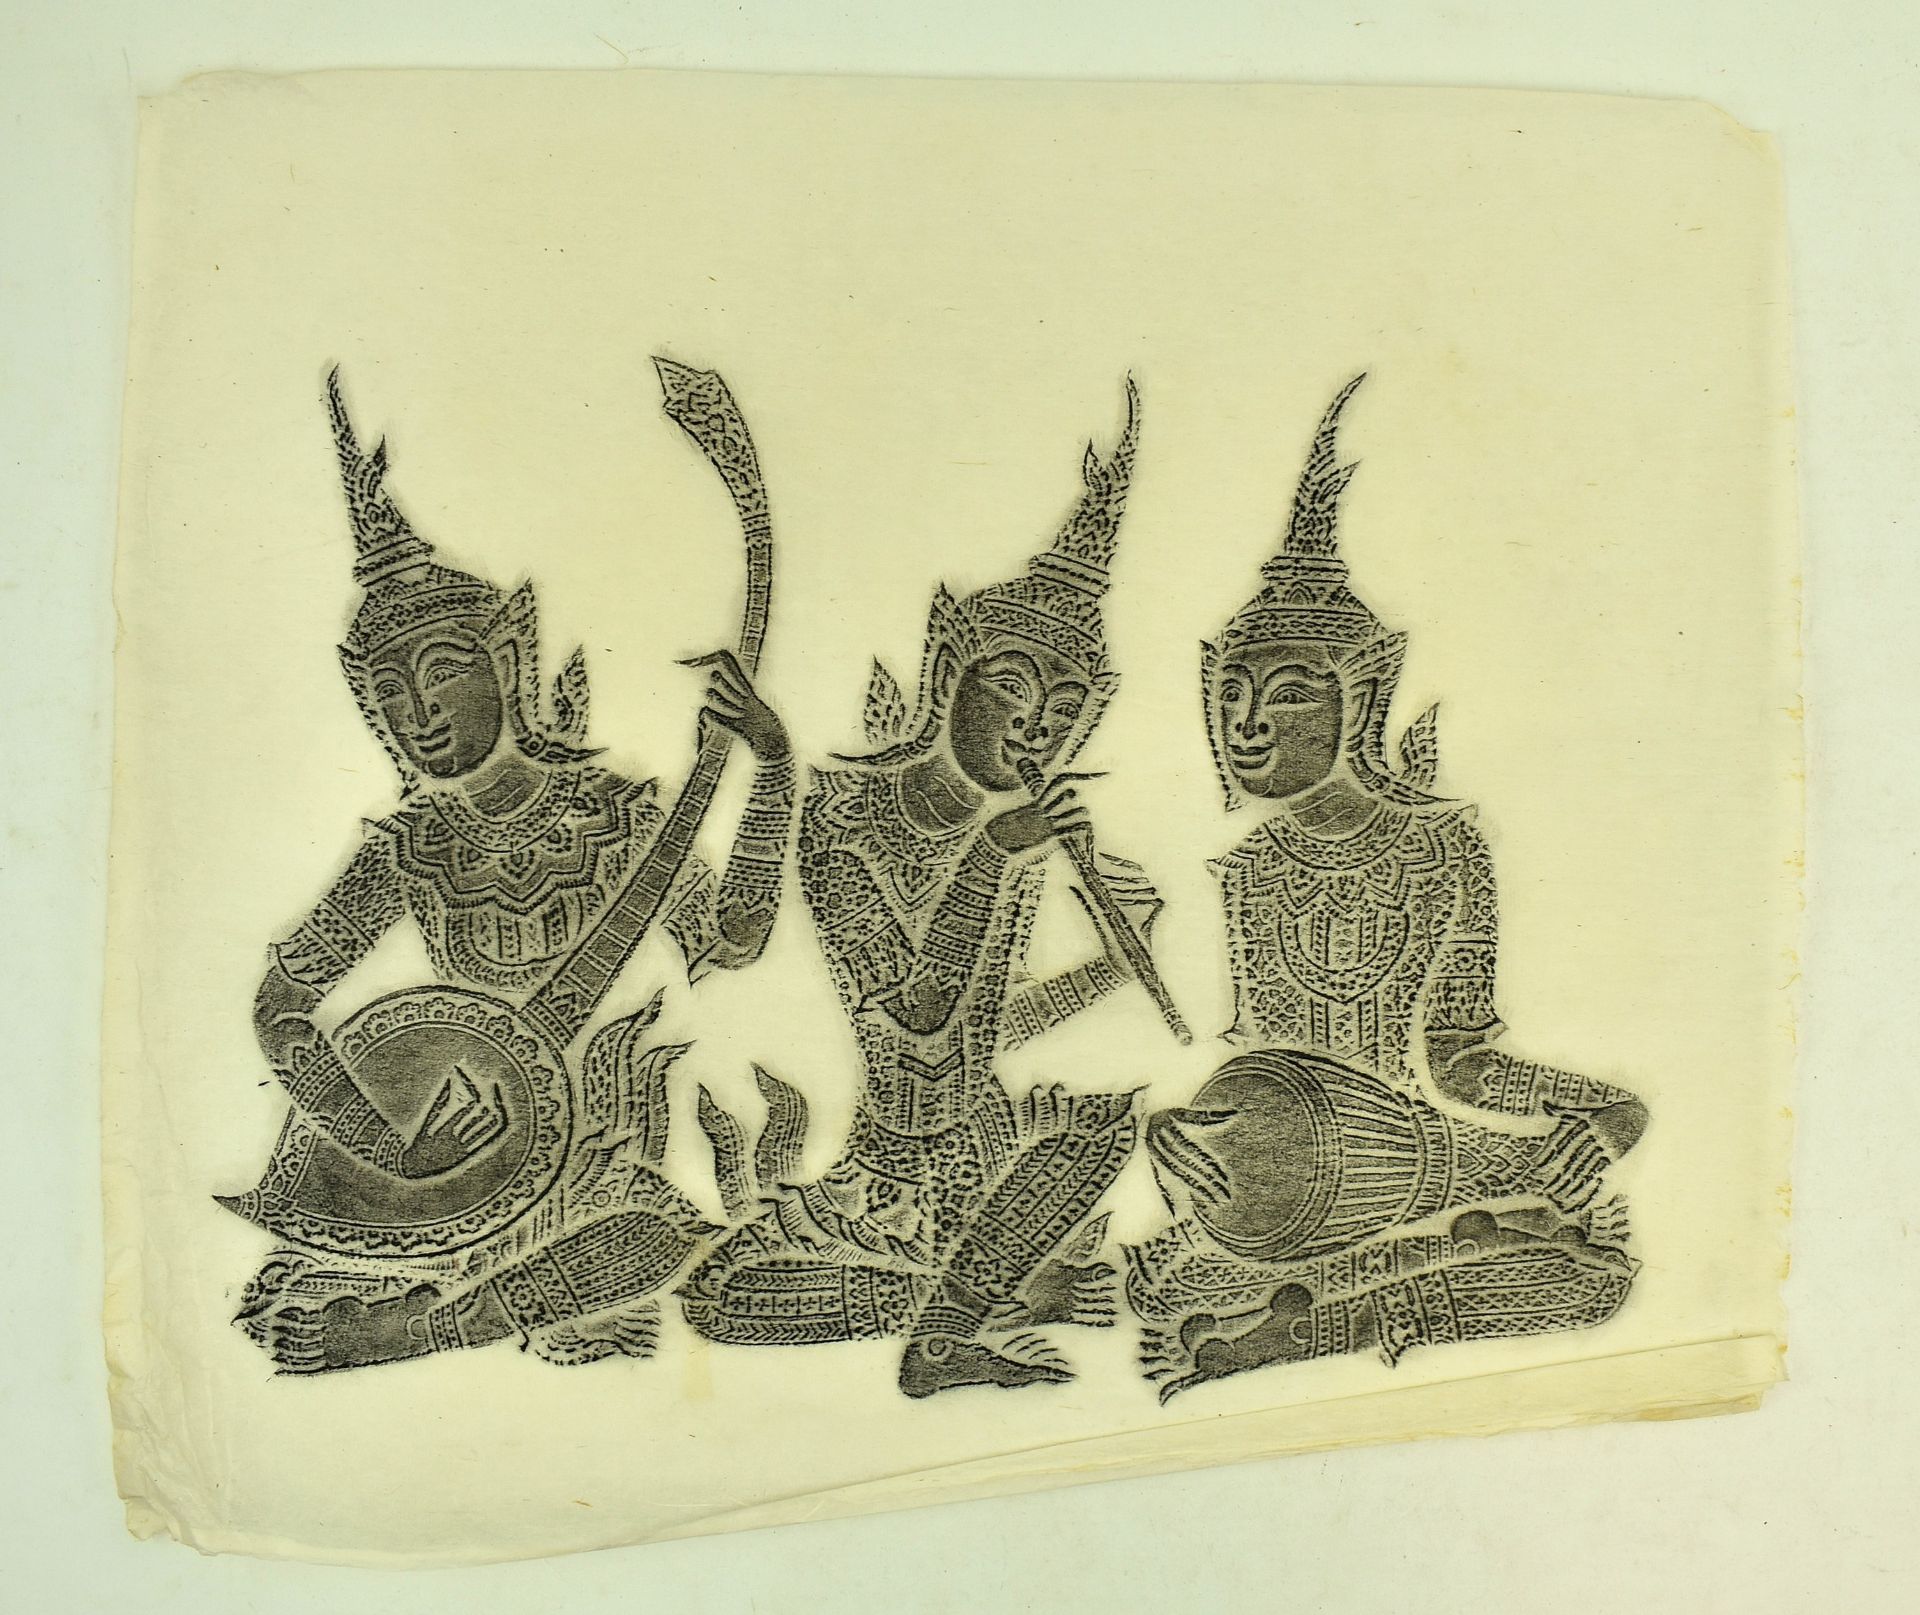 GROUP OF THREE THAI CHARCOAL RUBBING OF DANCERS & MUSICIANS - Image 3 of 3